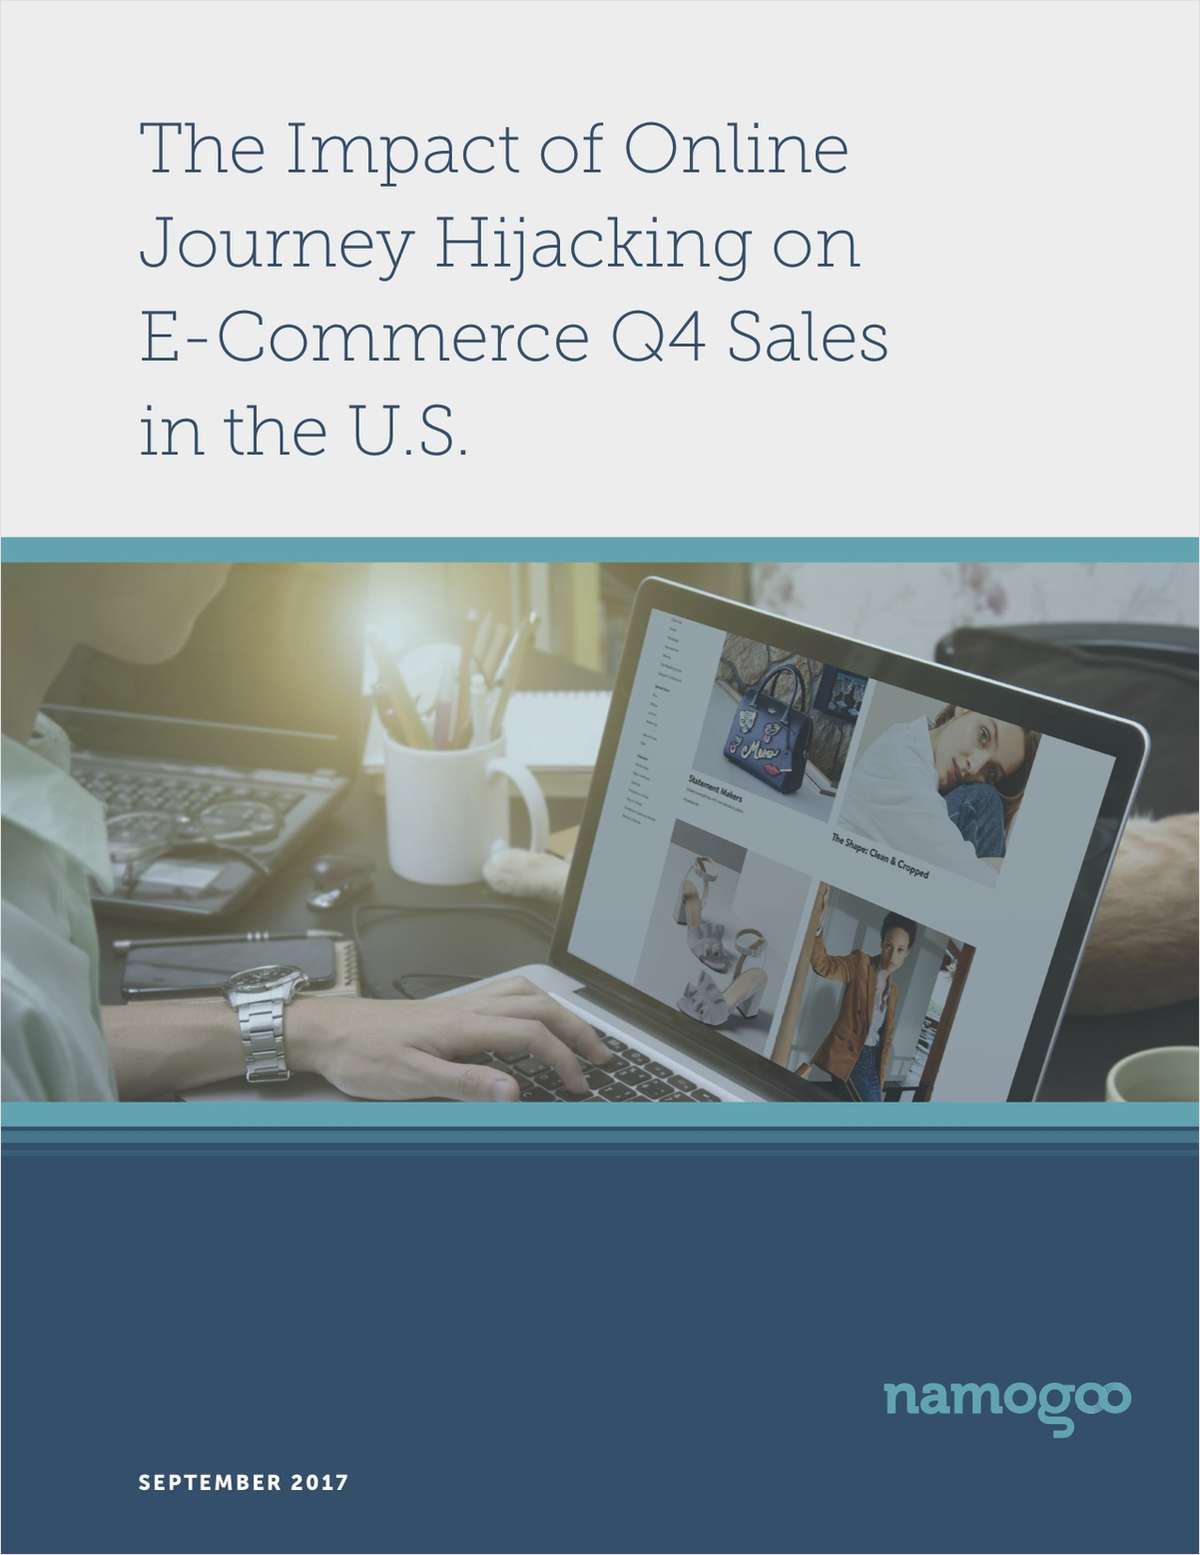 The Impact of Online Journey Hijacking on E-Commerce Q4 Sales in the U.S.